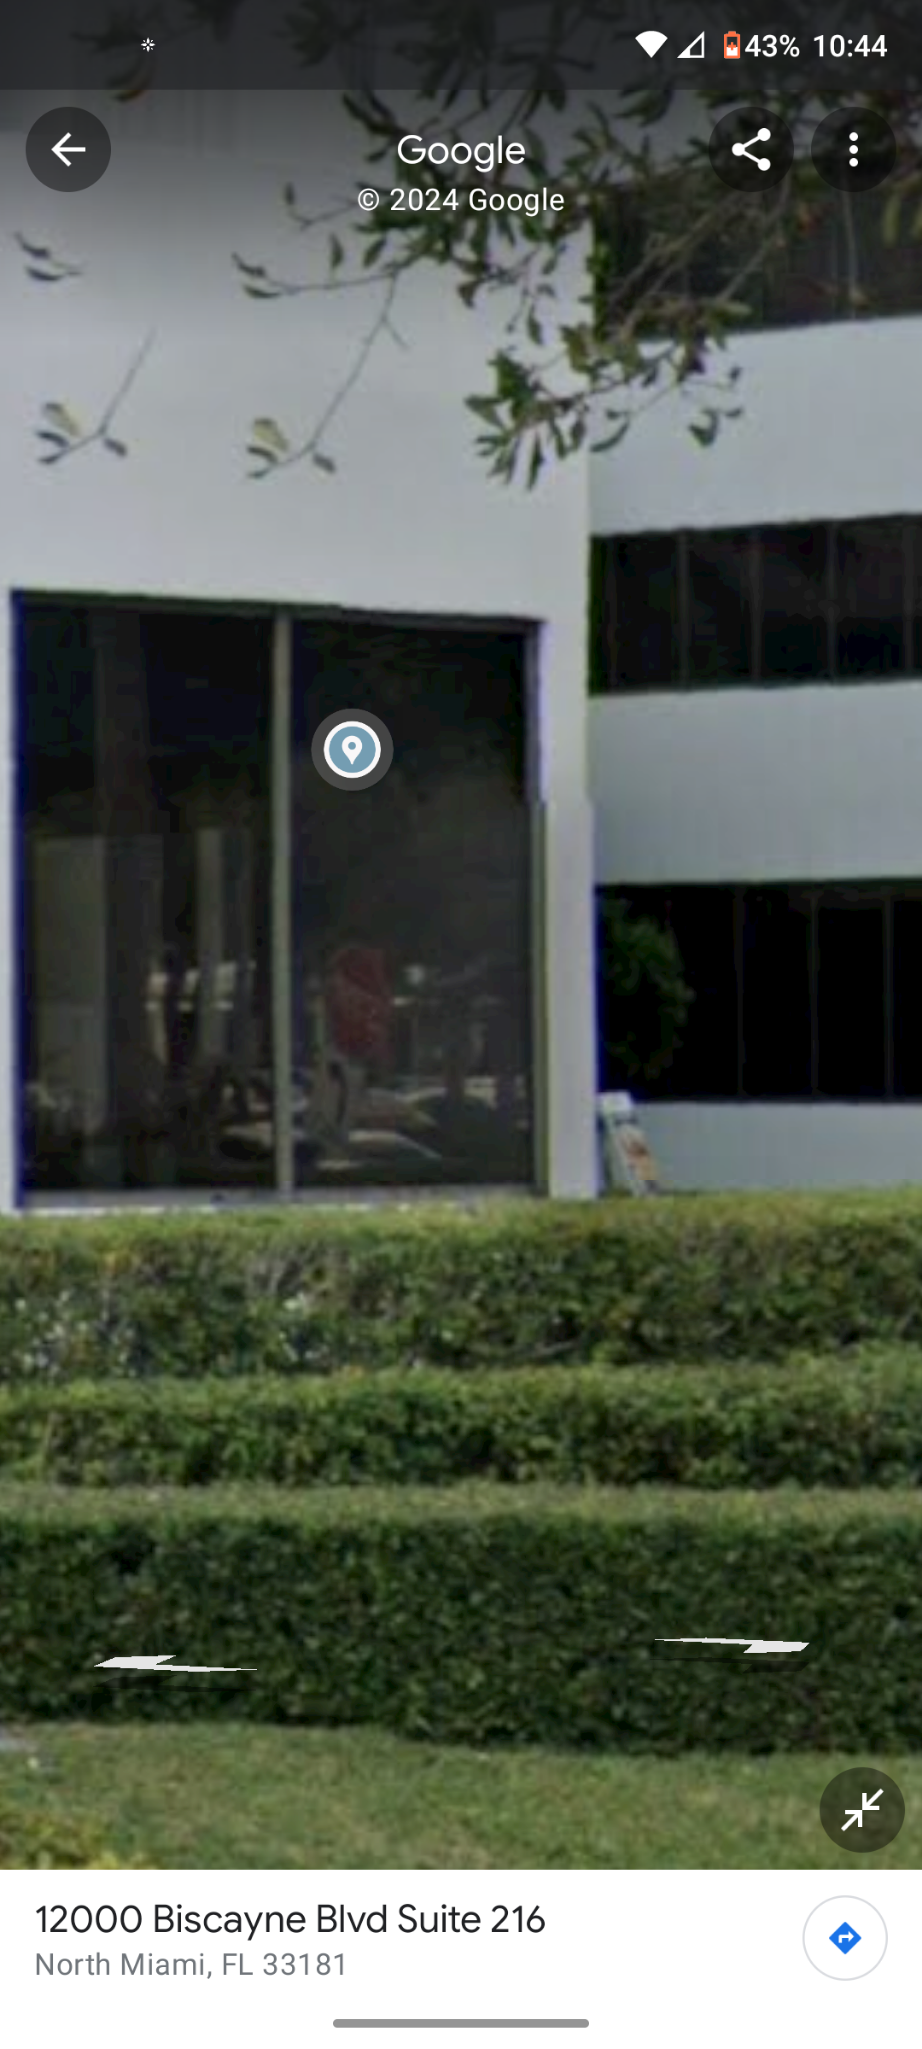 $Innovative Eyewear (LUCY.US)$ here's your corporate office this is the extent of the entire company right here, a 350 sq ft suite.